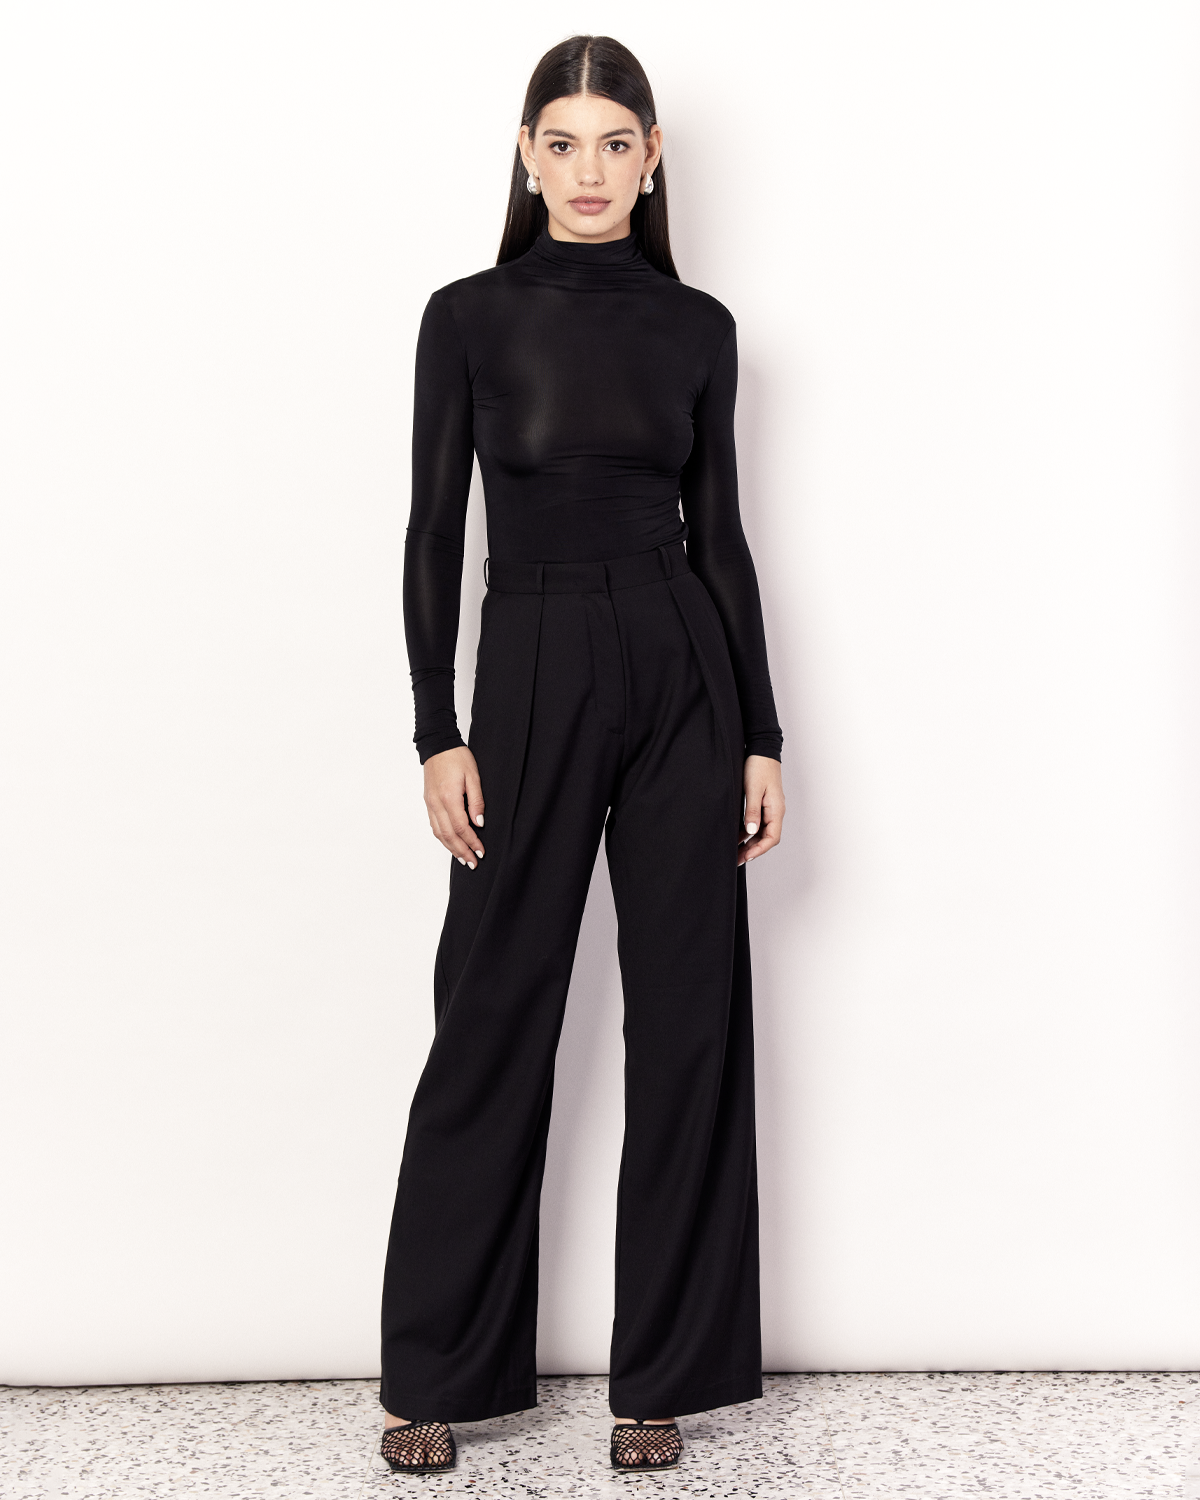 The Pleat Front Pant are an easy-wearing wide leg pant featuring a hidden clasp closure, pockets, and pleated detailing down the front, creating a subtle drape in the leg. They are crafted from a soft wool blend in Black. Now available at Romy. 